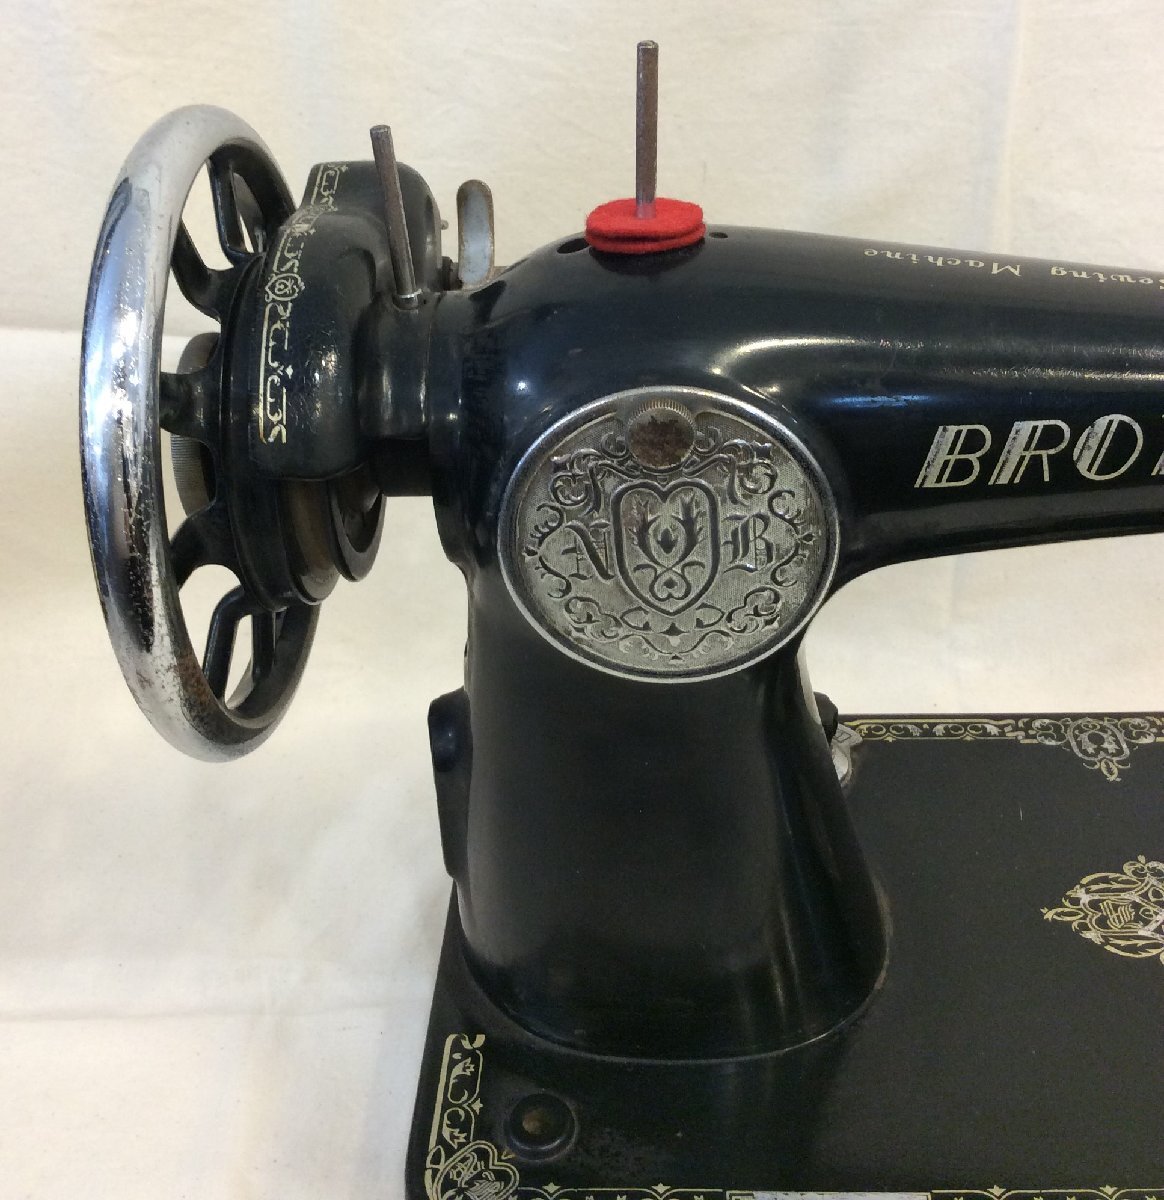 [ junk ]brother Brother retro sewing machine Showa era made in Japan antique Vintage 